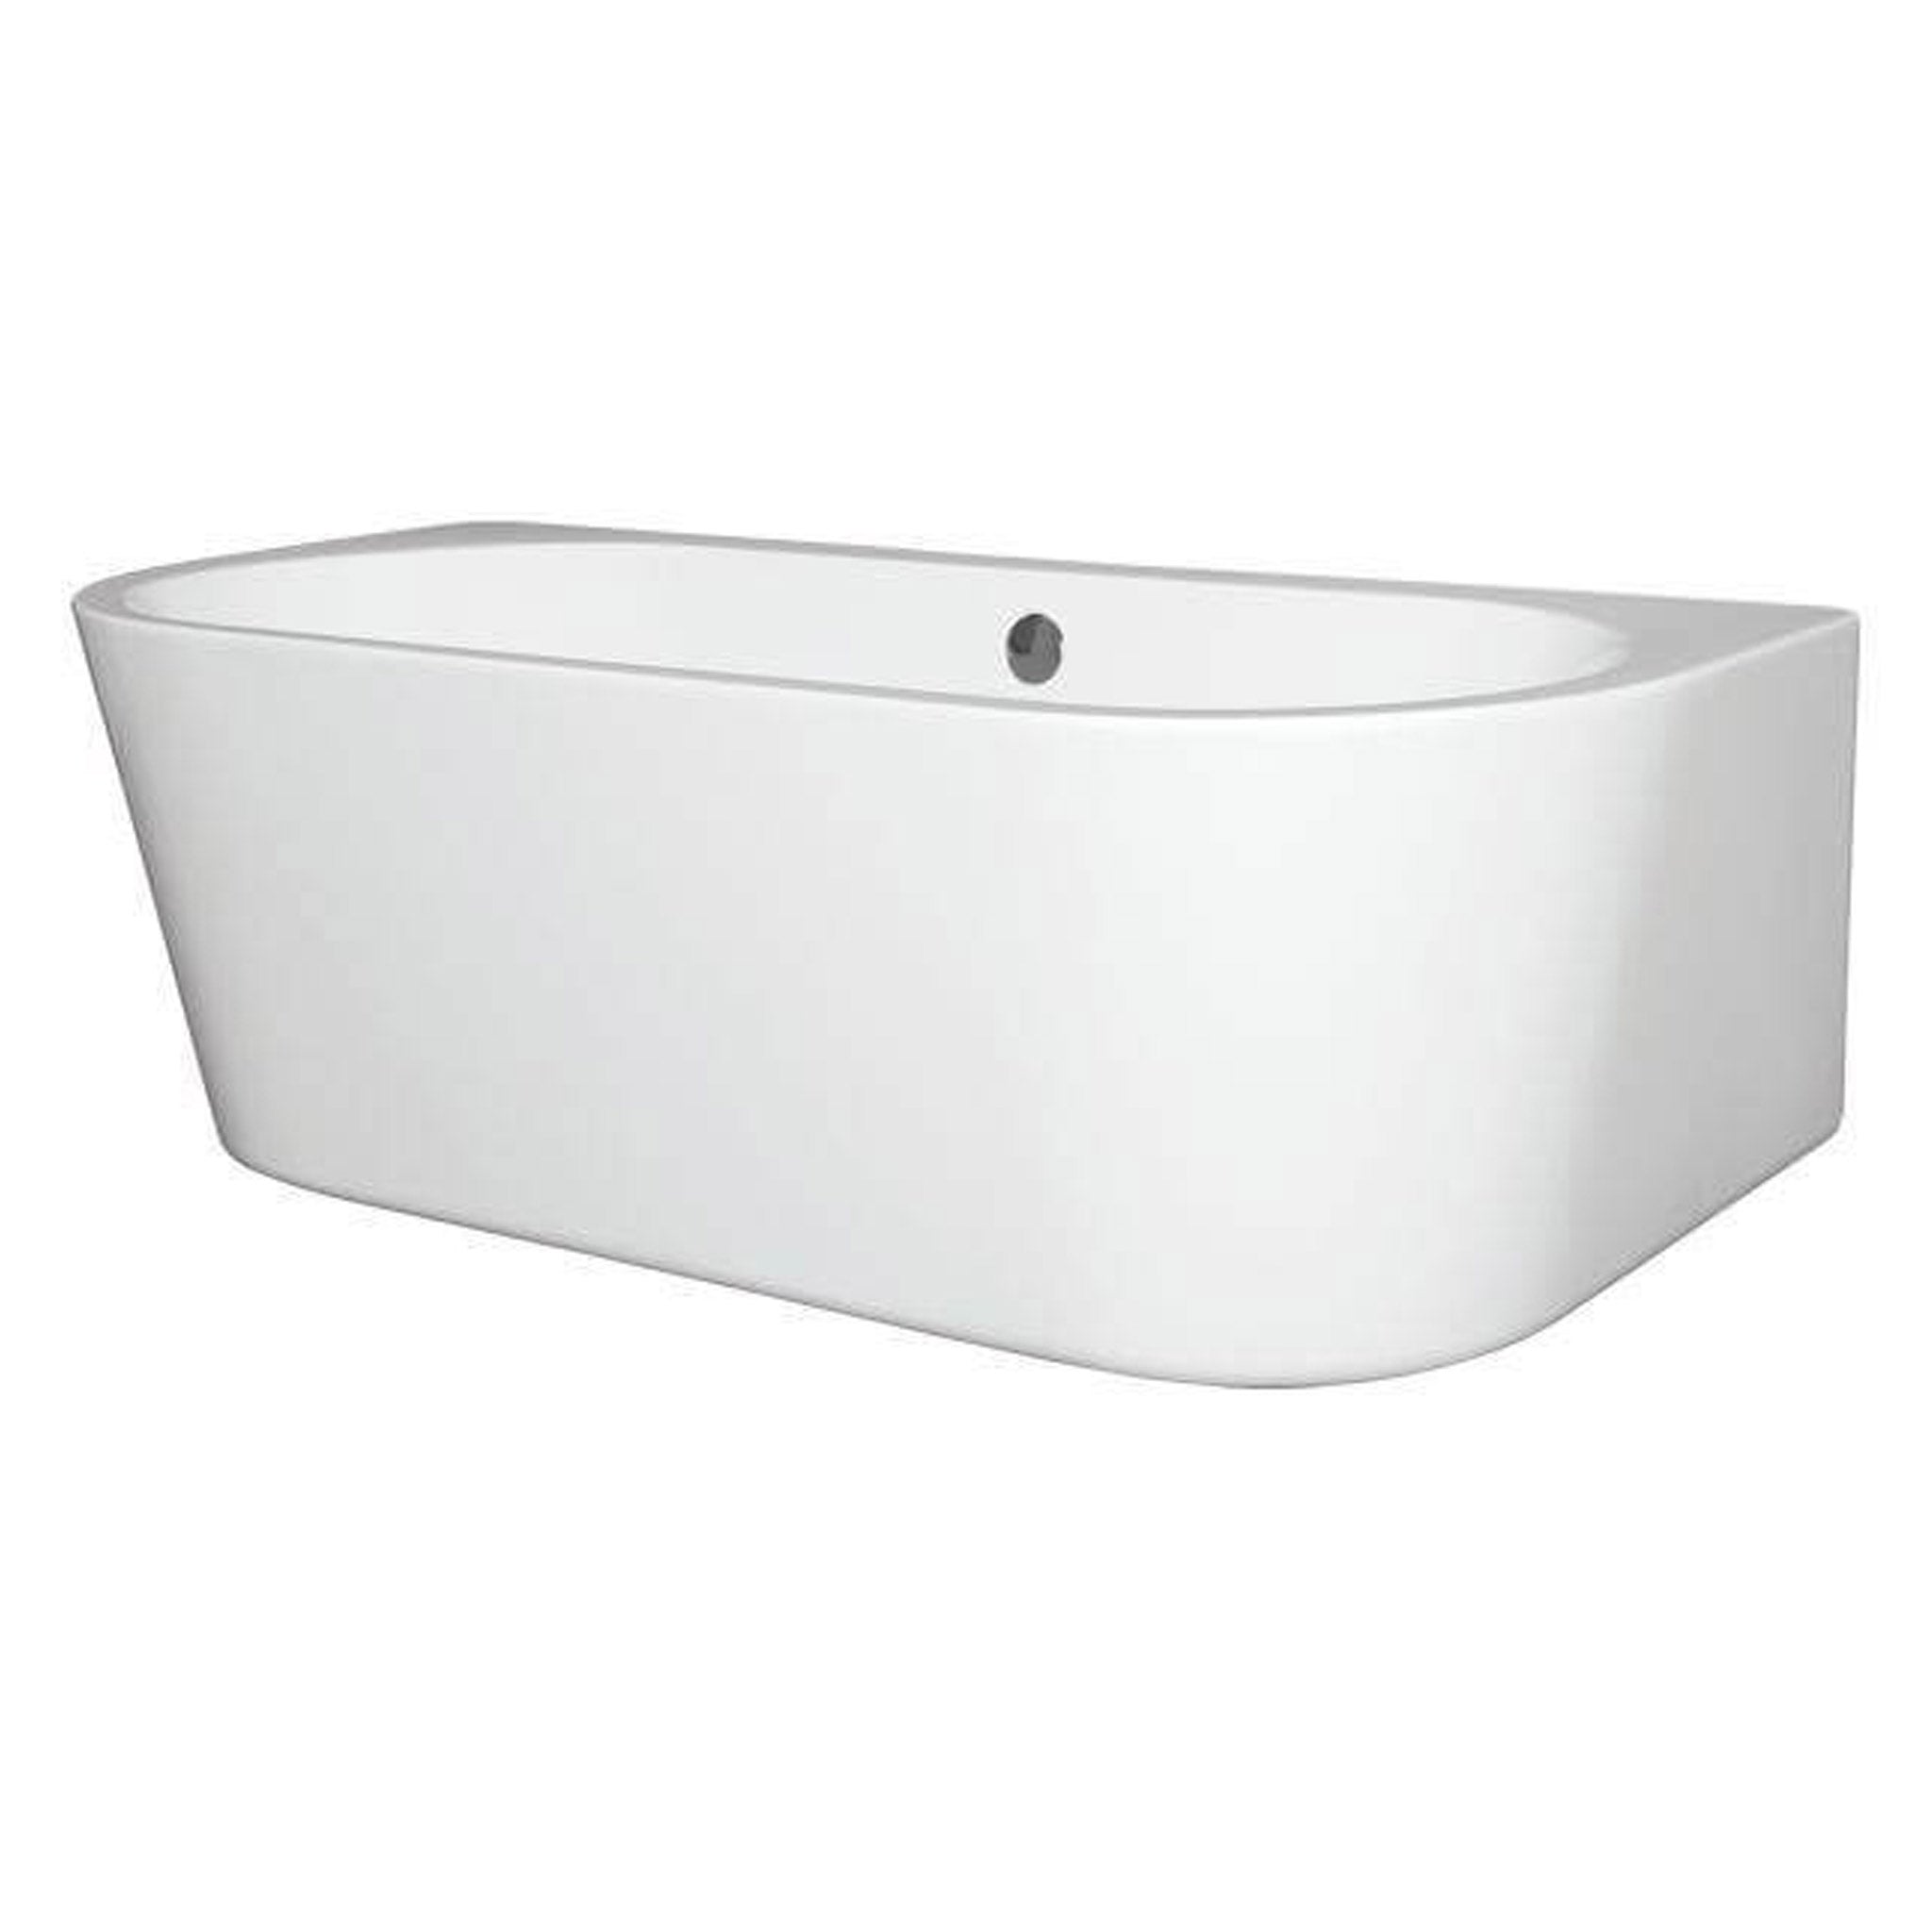 BC Designs Ancora Round Double Ended Acrymite Bath 1640 x 760mm